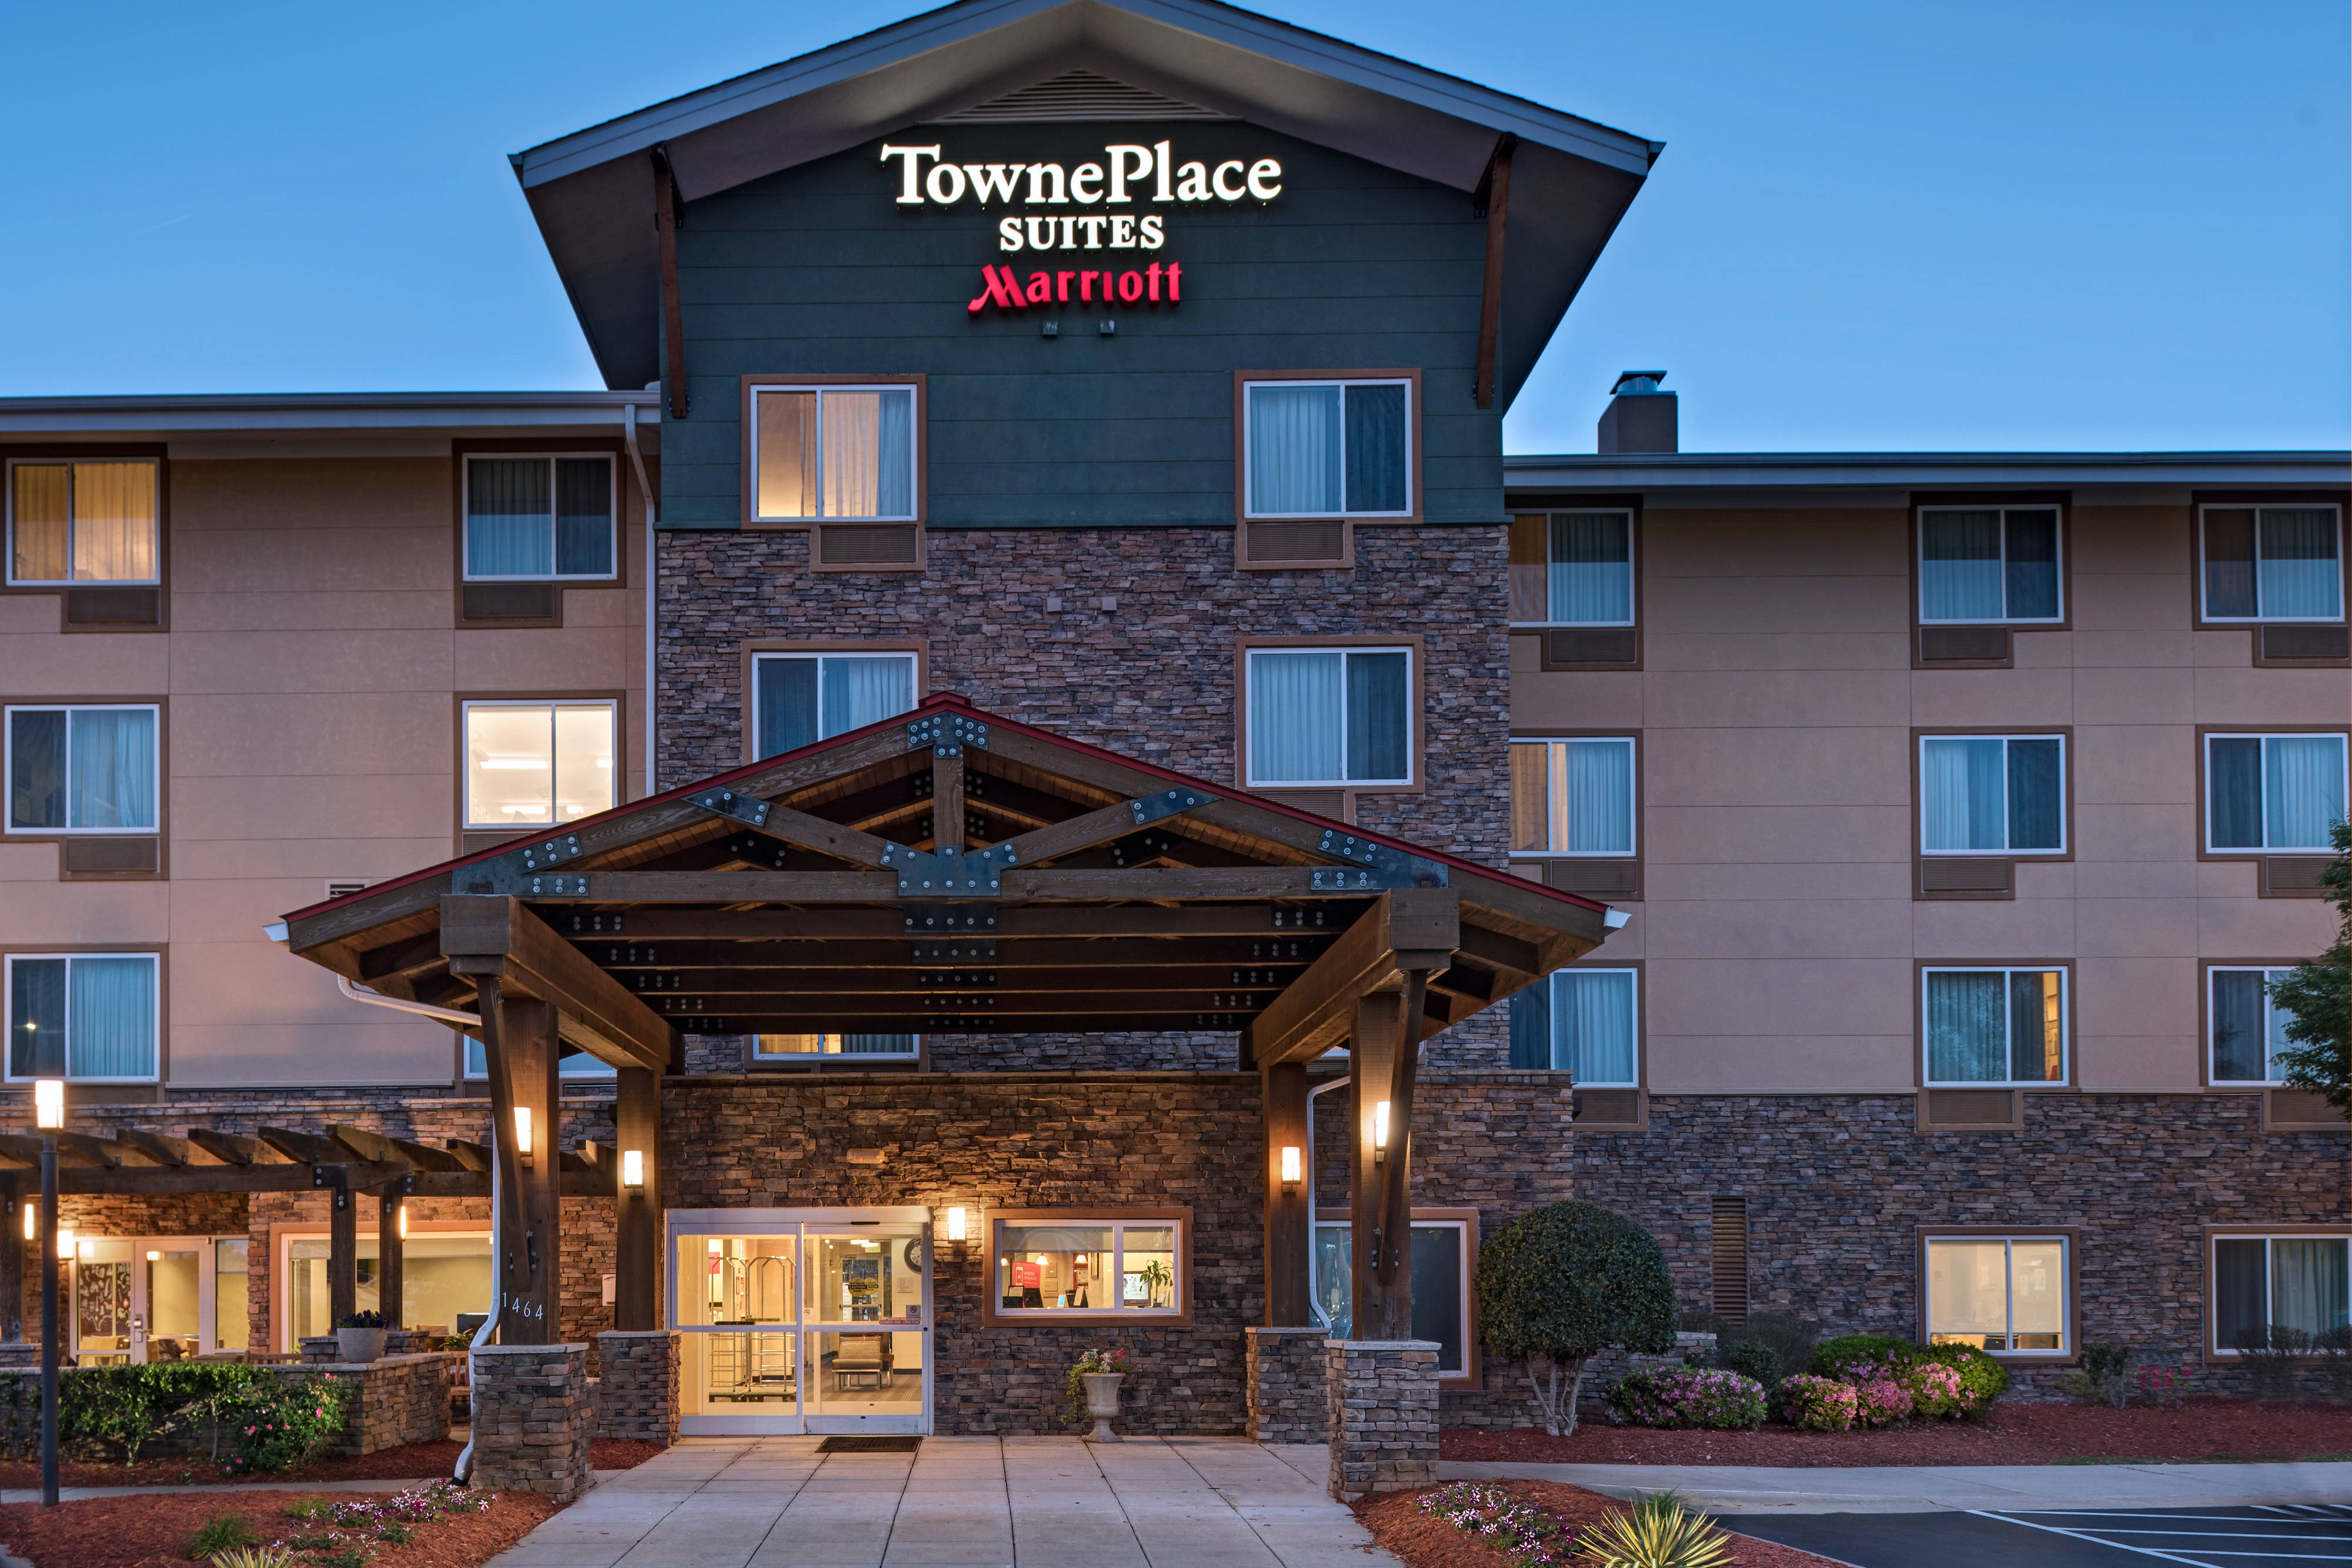 Photo of TownePlace Suites Fayetteville Cross Creek, Fayetteville, NC